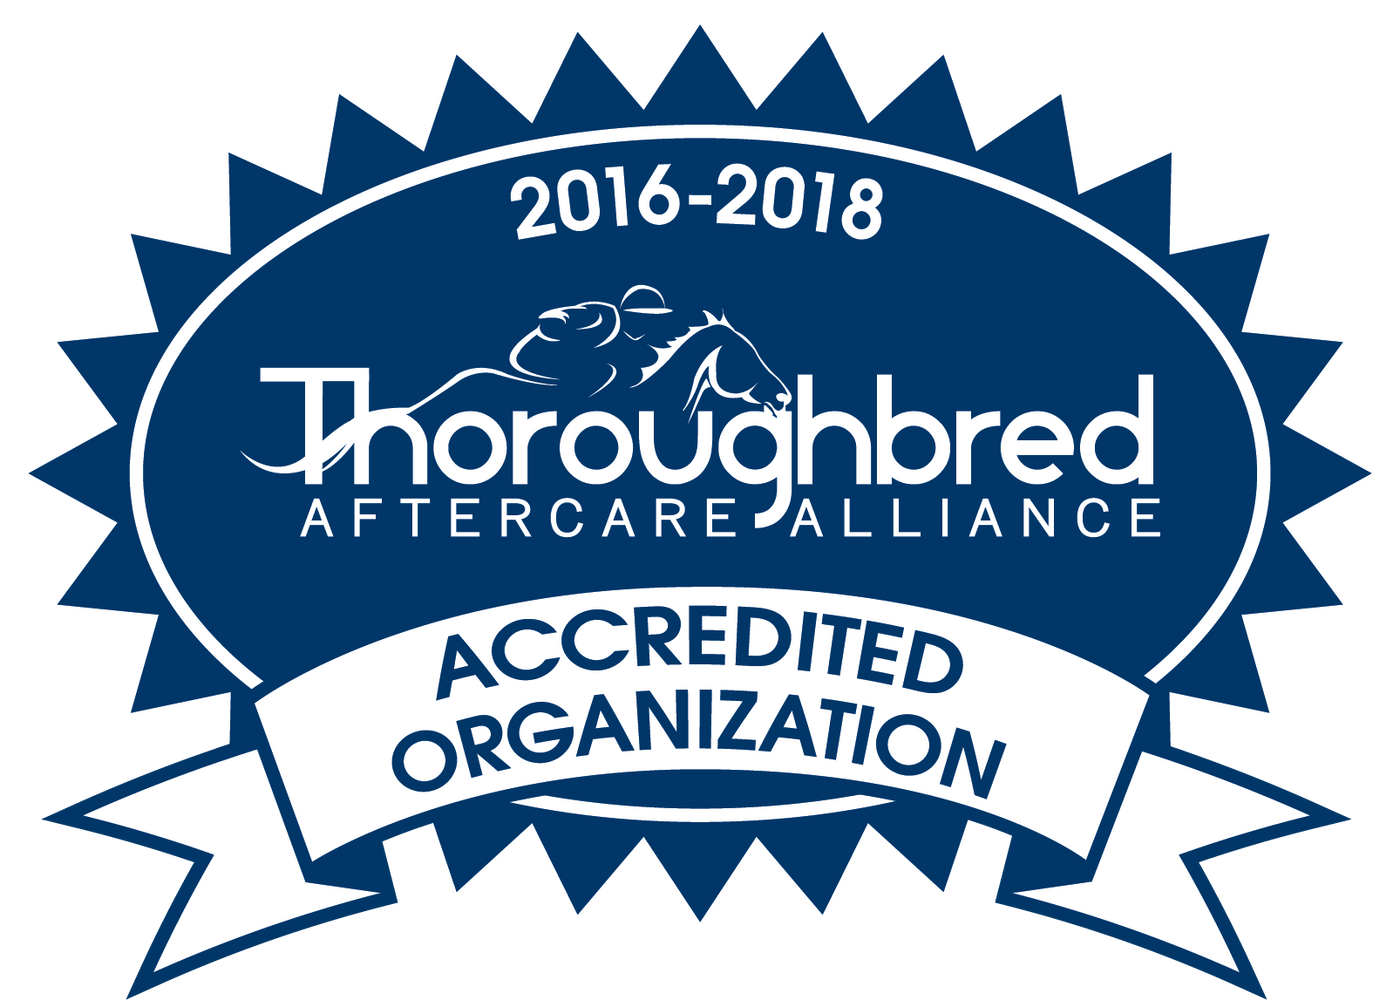 1 of 64 Organizations in the US and Canada, Friends of Ferdinand Earns TAA Re-Accreditation